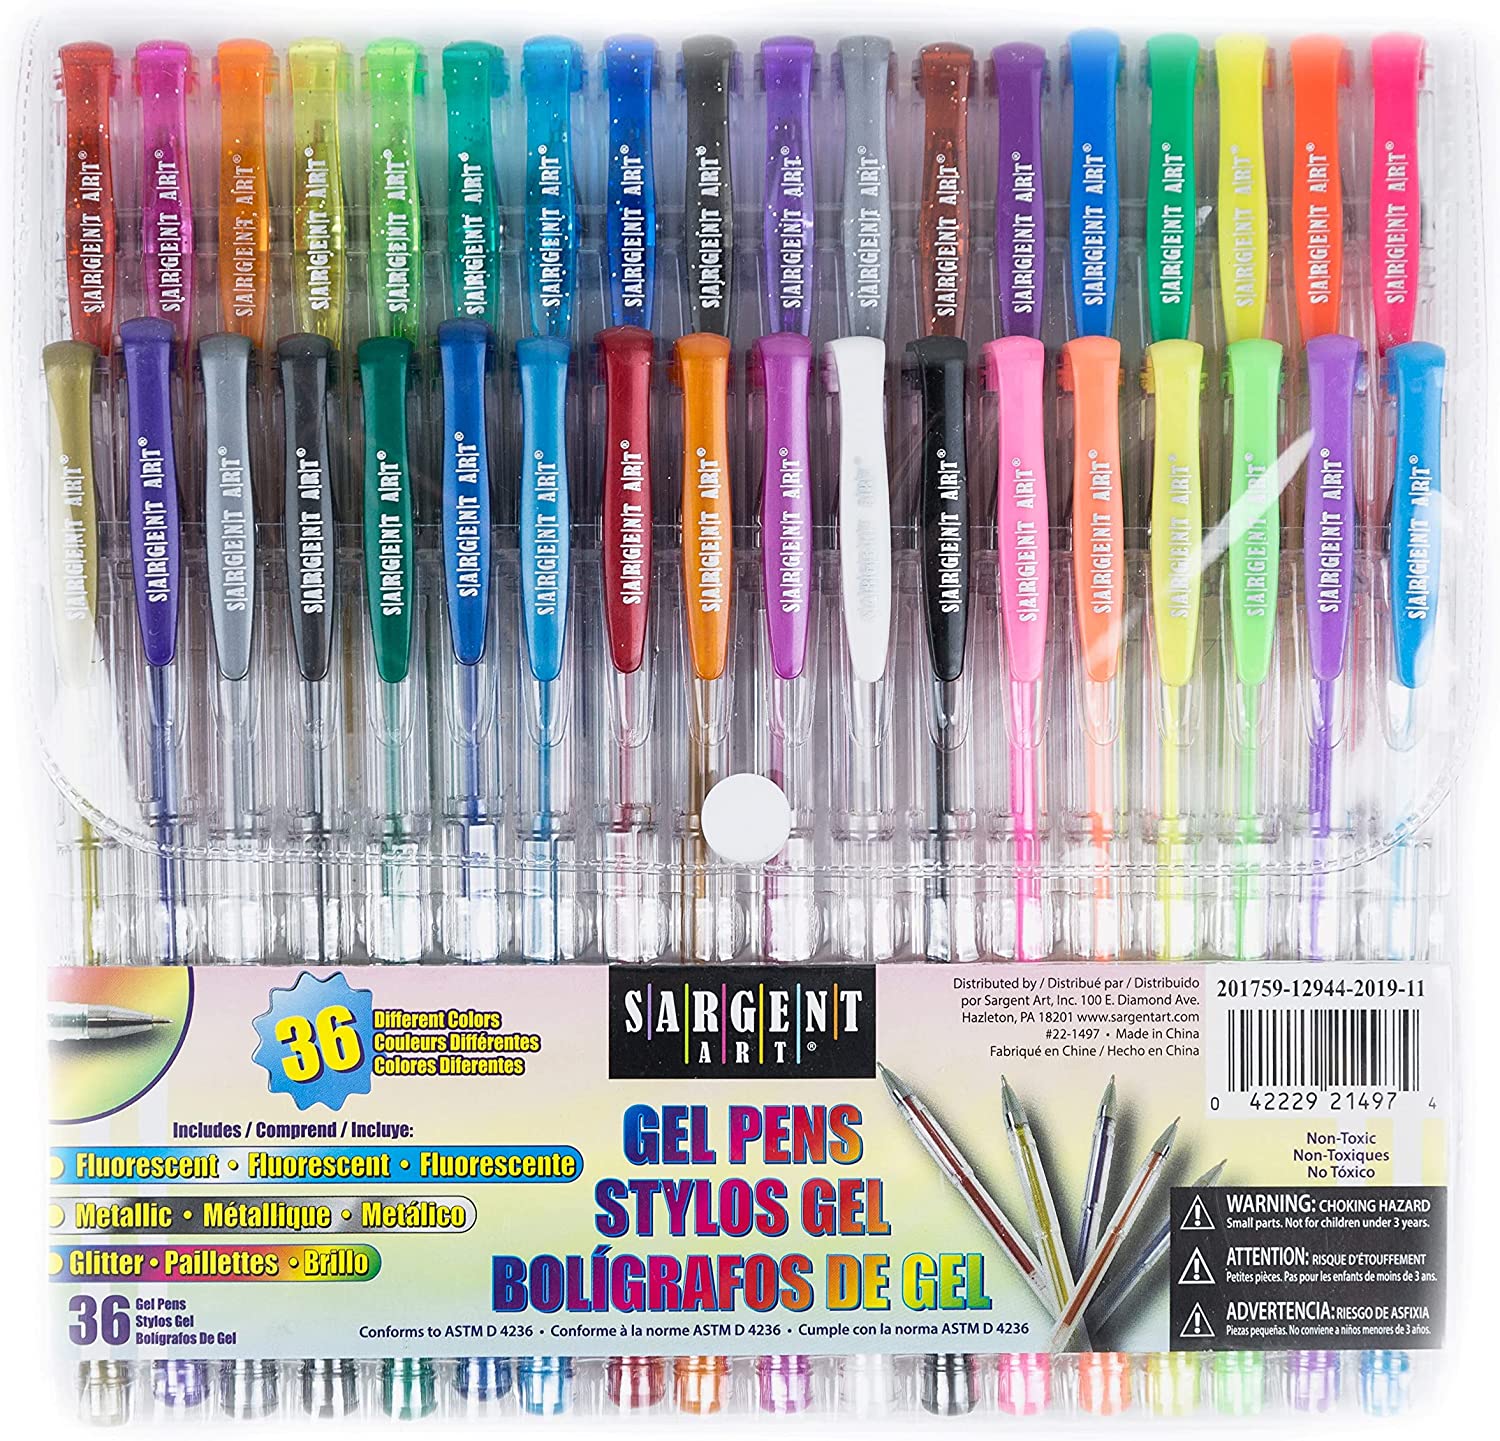 36-Count Sargent Art Gel Pens (Assorted Colors) $5.50 + Free Shipping w/ Prime or on orders over $25